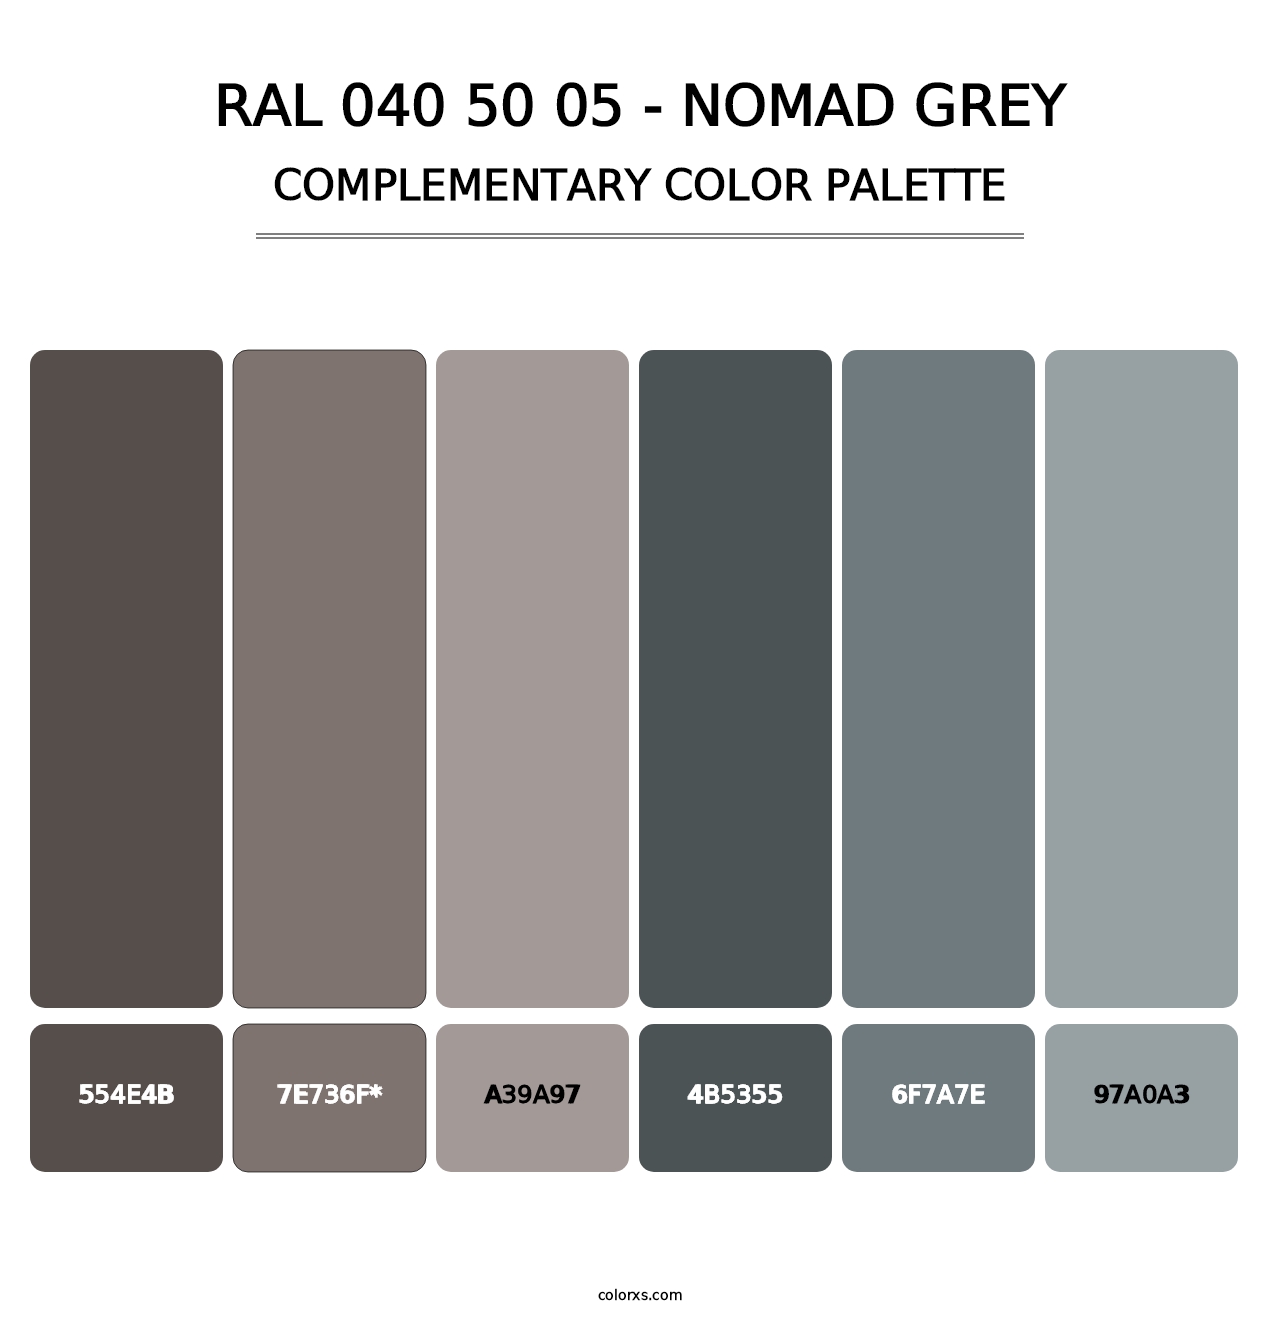 RAL 040 50 05 - Nomad Grey - Complementary Color Palette